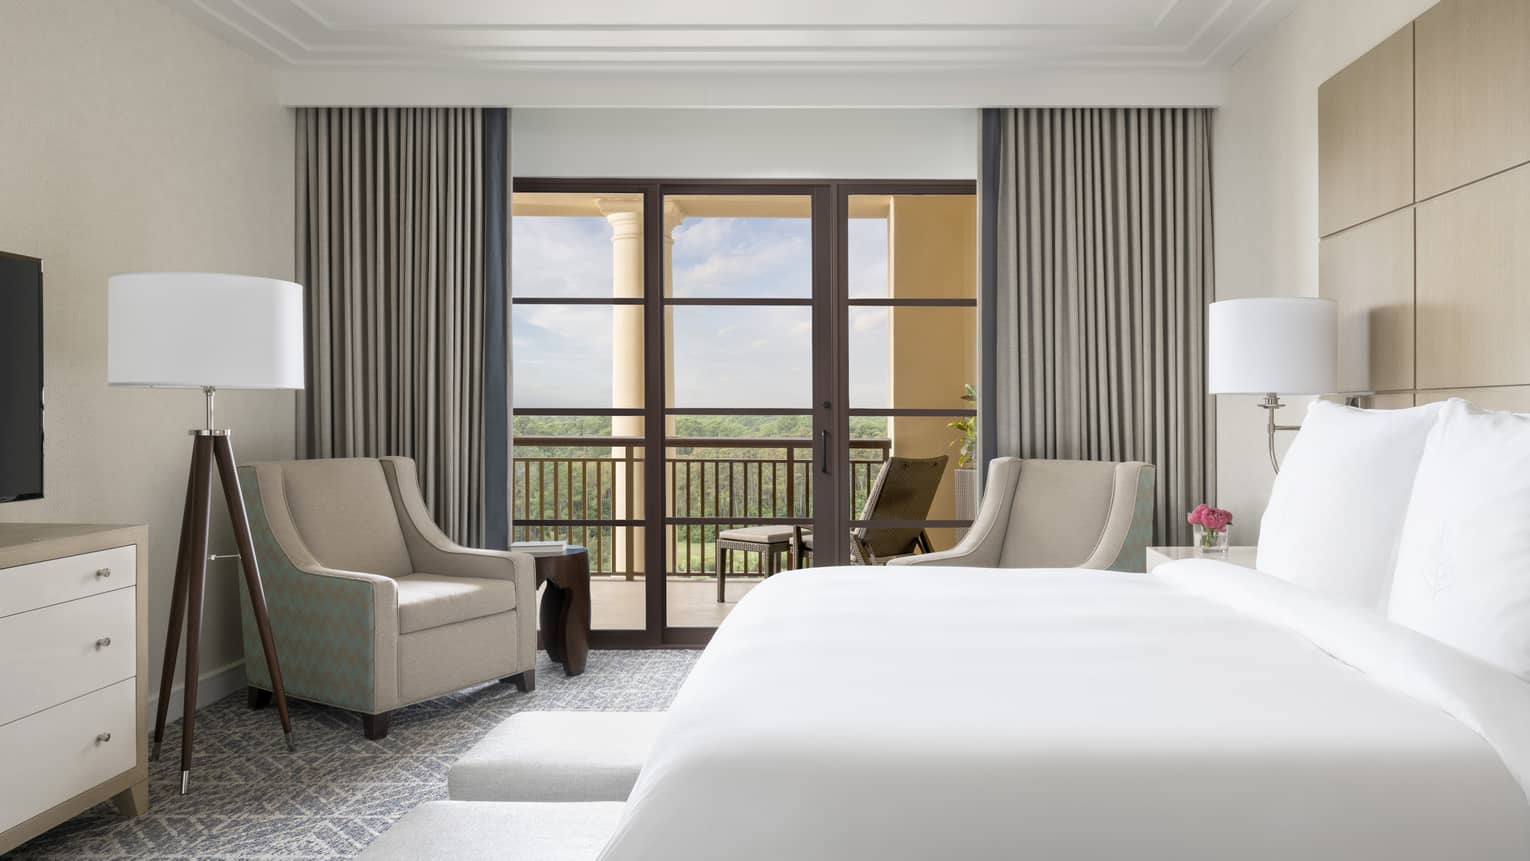 Hotel room with white king bed, two beige arm chairs, grey curtains, walk-out balcony